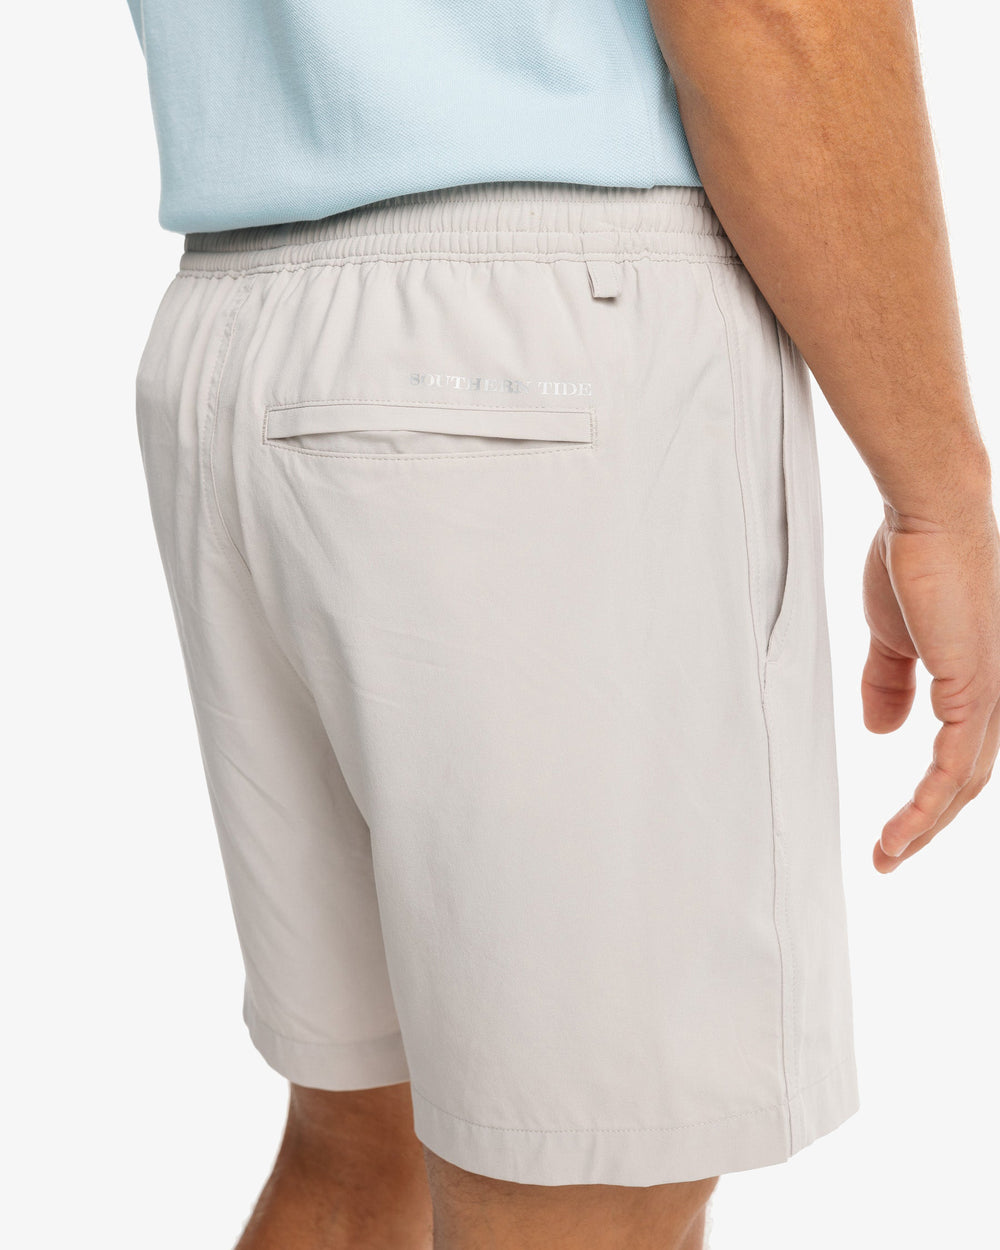 The model pocket view of the Men's Rip Channel 6 Inch Performance Short by Southern Tide - Marble Grey